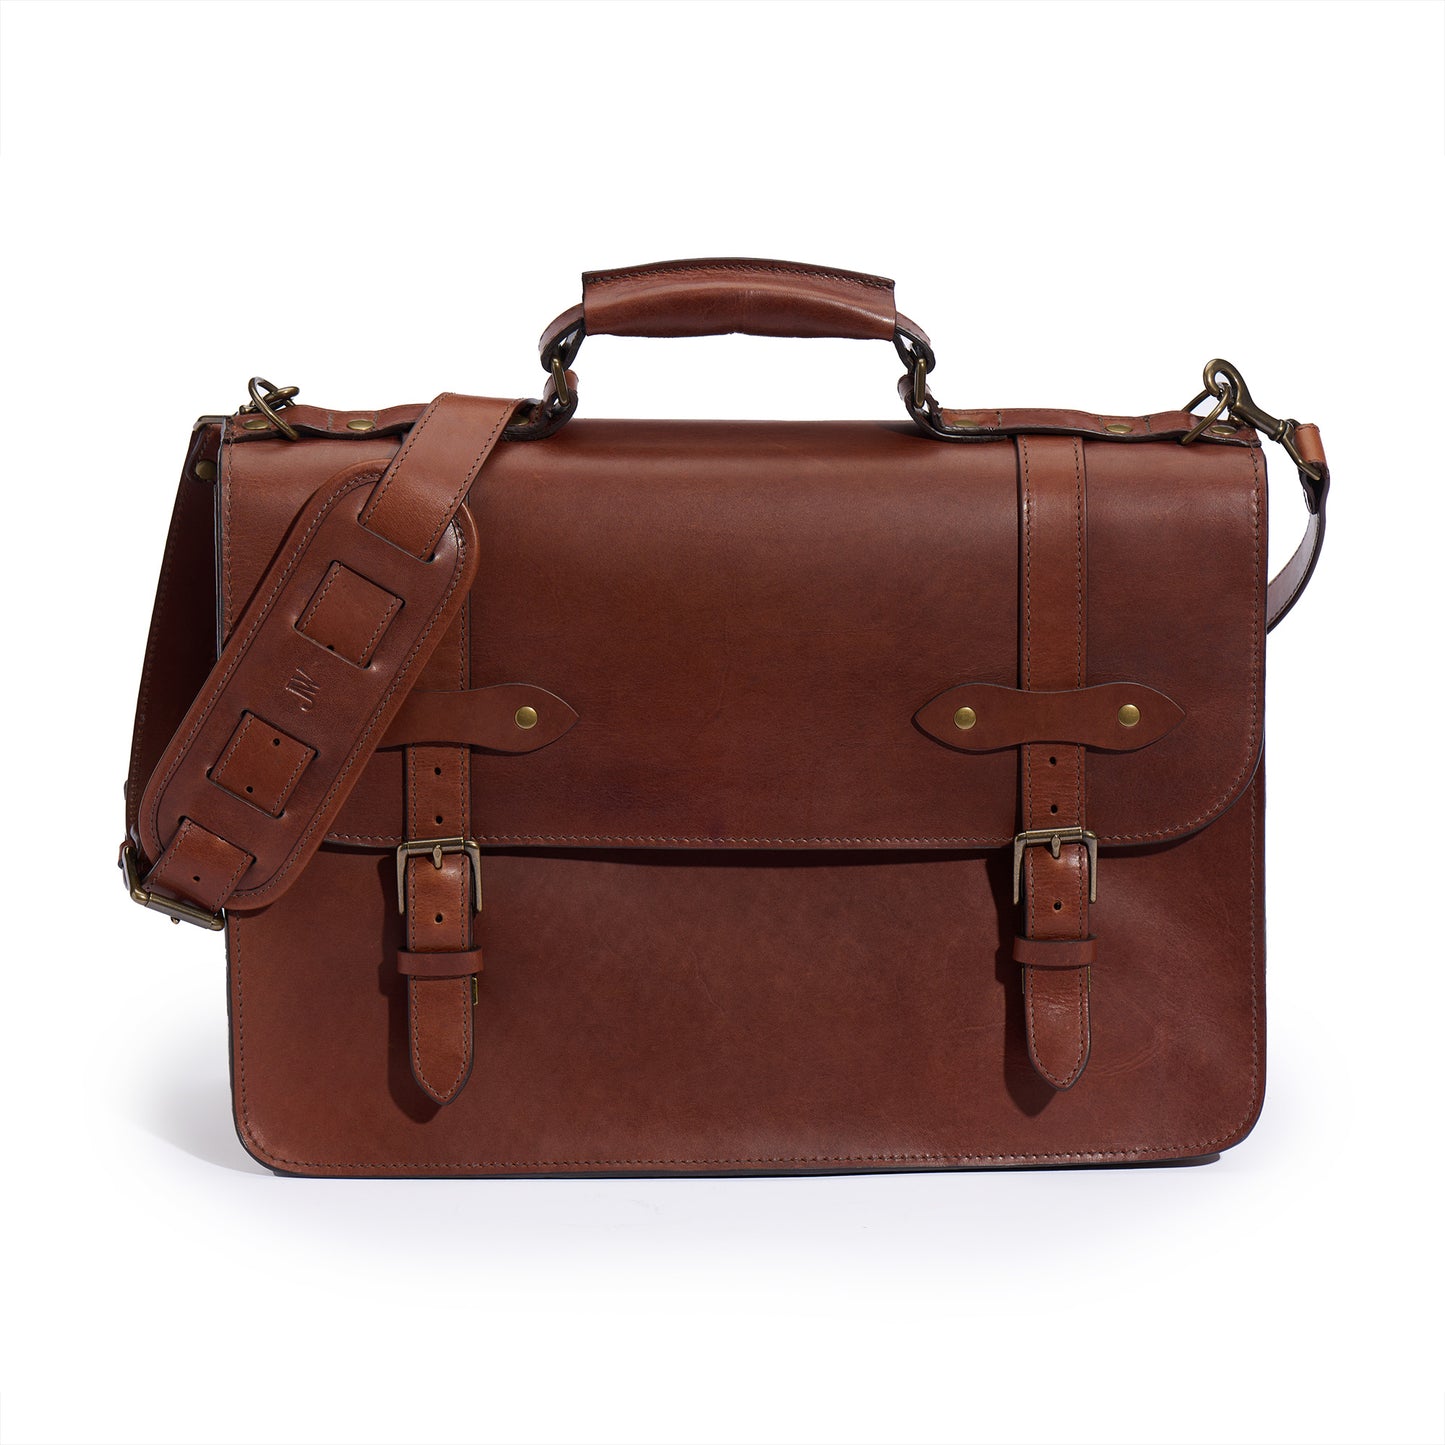 Esq. Briefcase in Vintage Brown Full Grain Leather - front main shot with shoulder strap - by Jackson Wayne